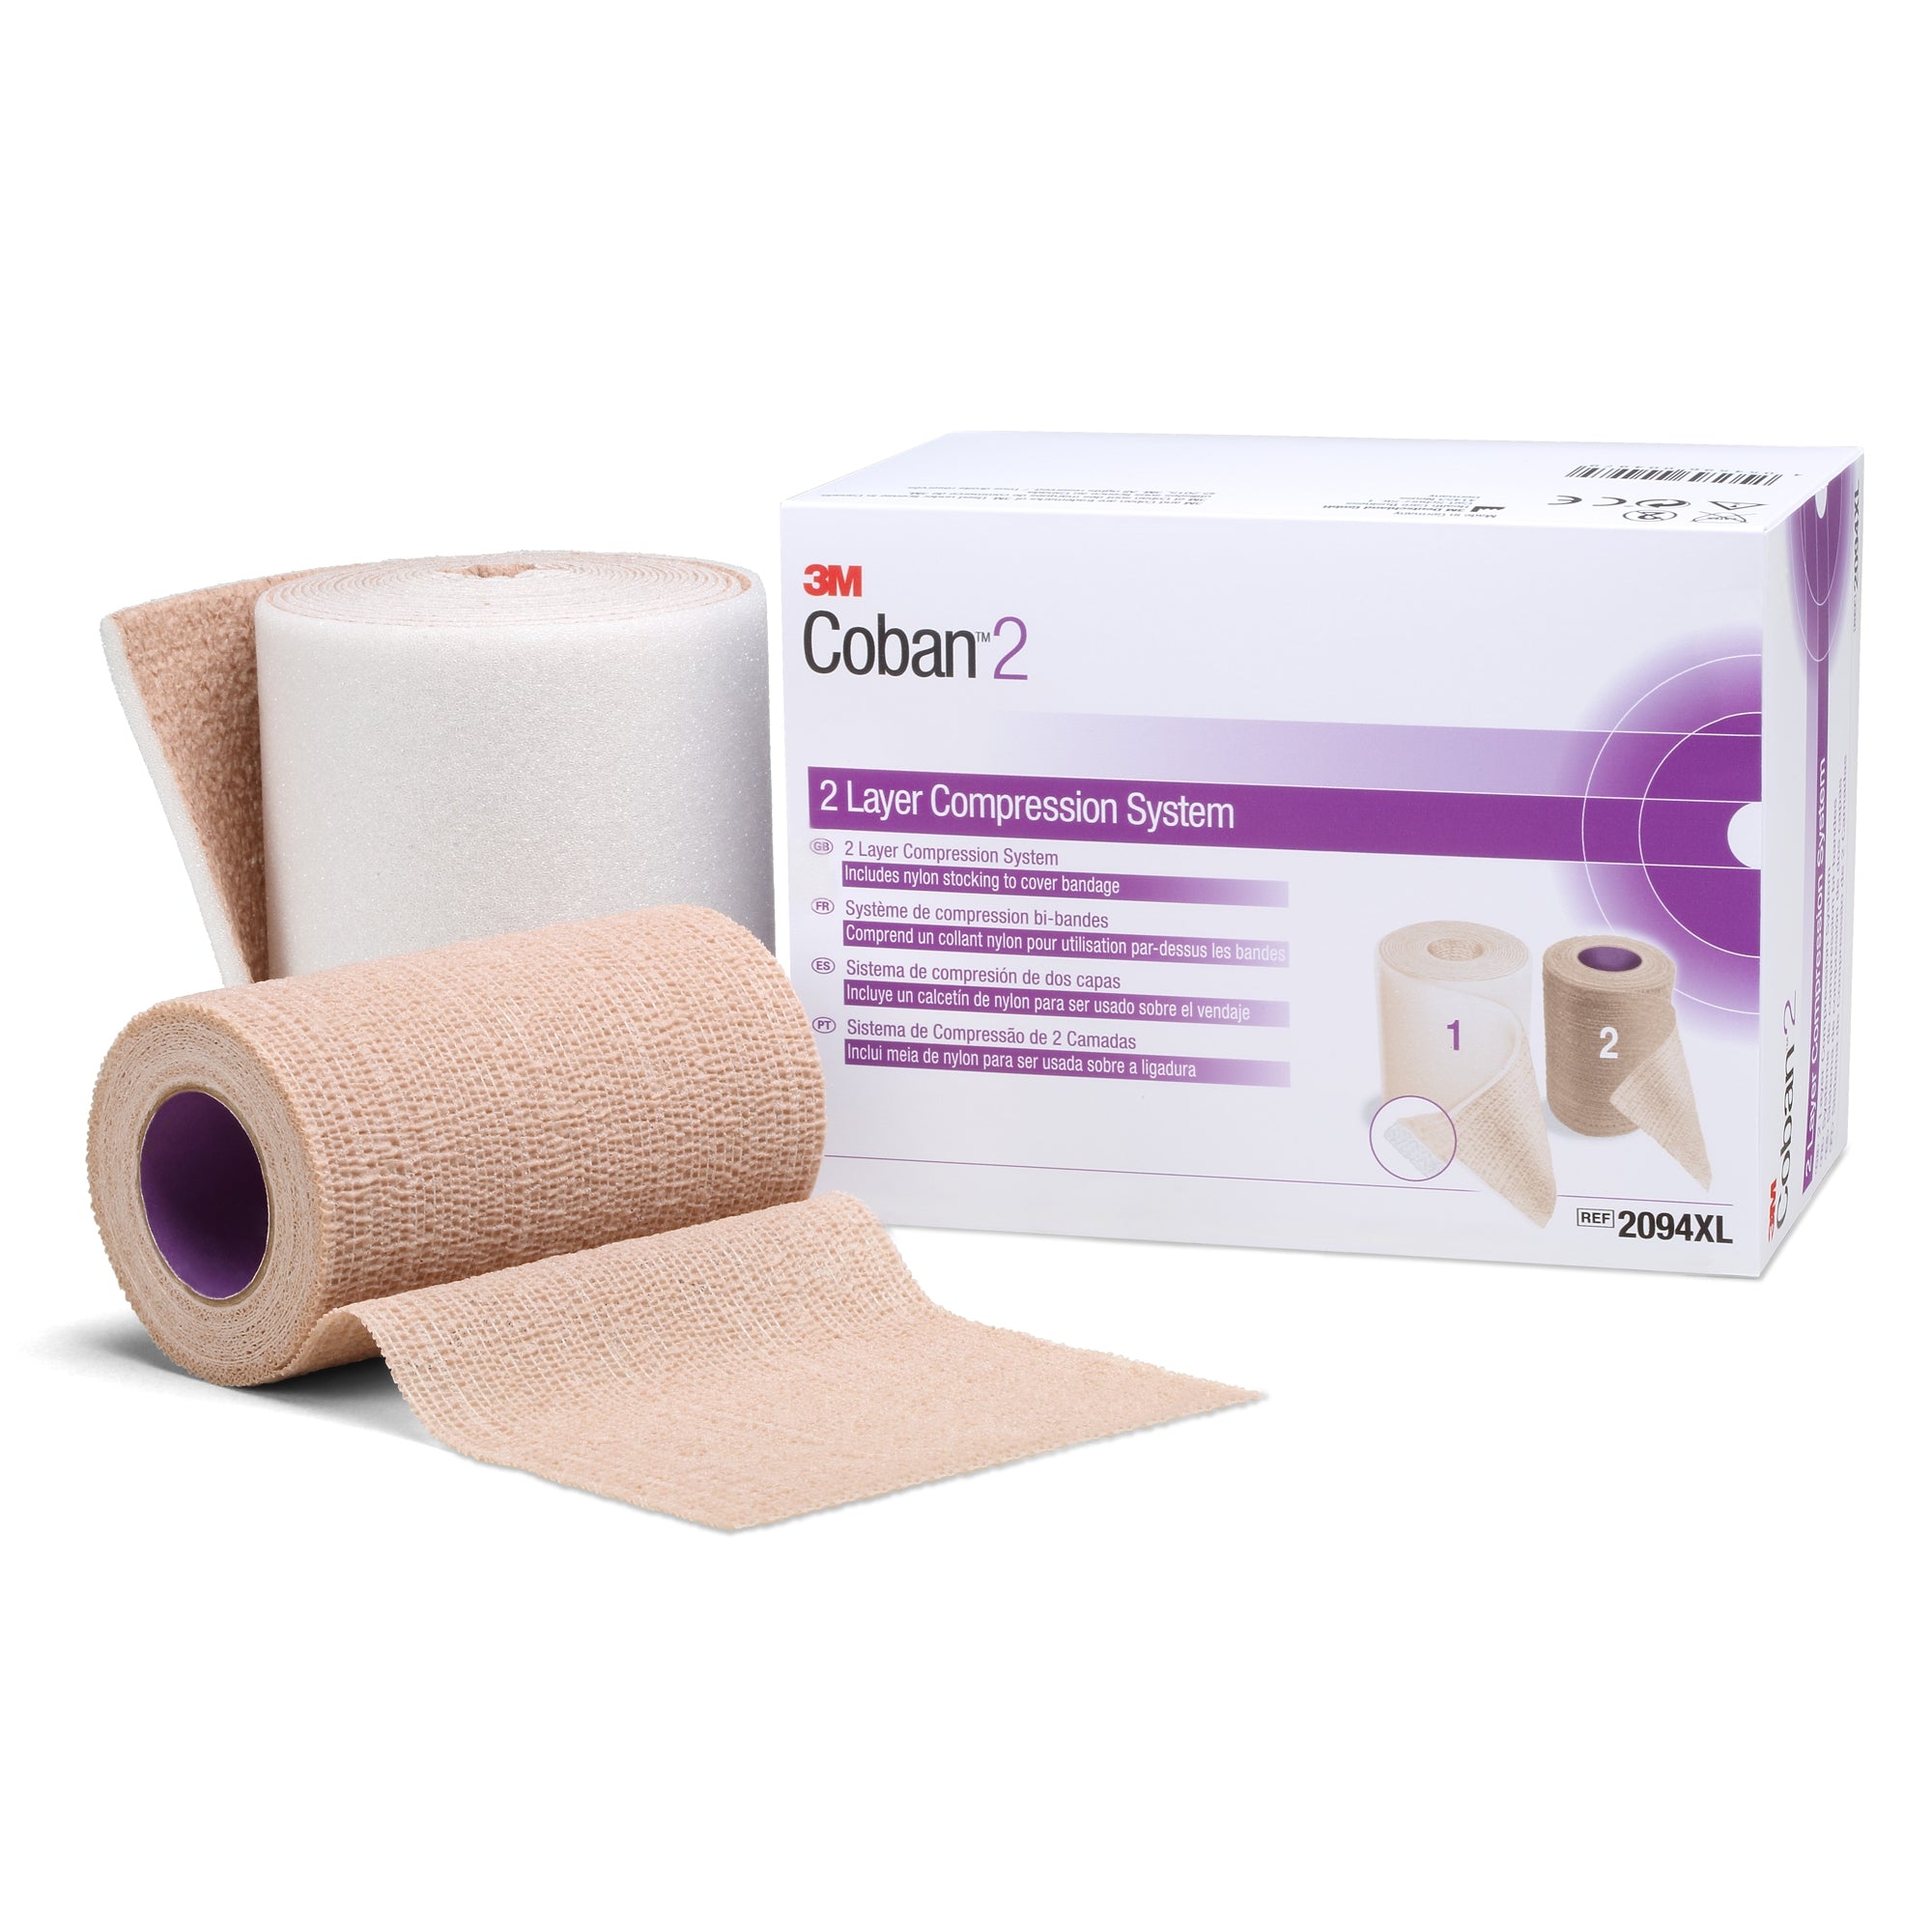 3M Coban 2 Two-Layer Compression Bandage System 2094XL - Self-Adherent / Pull On Closure, Tan / White, 35 to 40 mmhg - 4